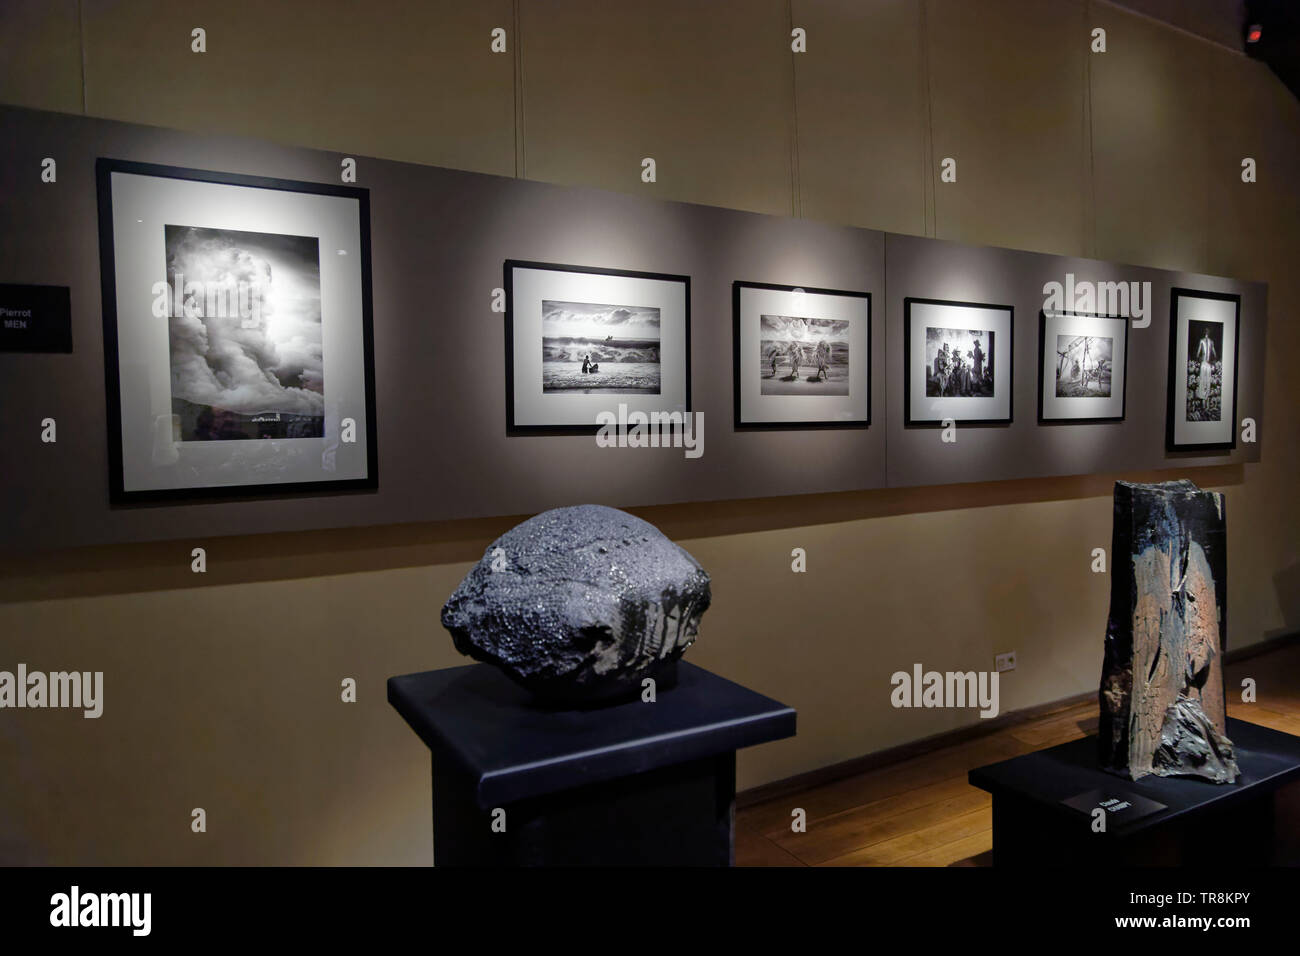 Tours, France.24th May,2019.Exhibition Re-naissance(s) of the Capazza Galleryin Hotel Gouin.©:Veronique Phitoussi/Alamy Stock Photo Stock Photo